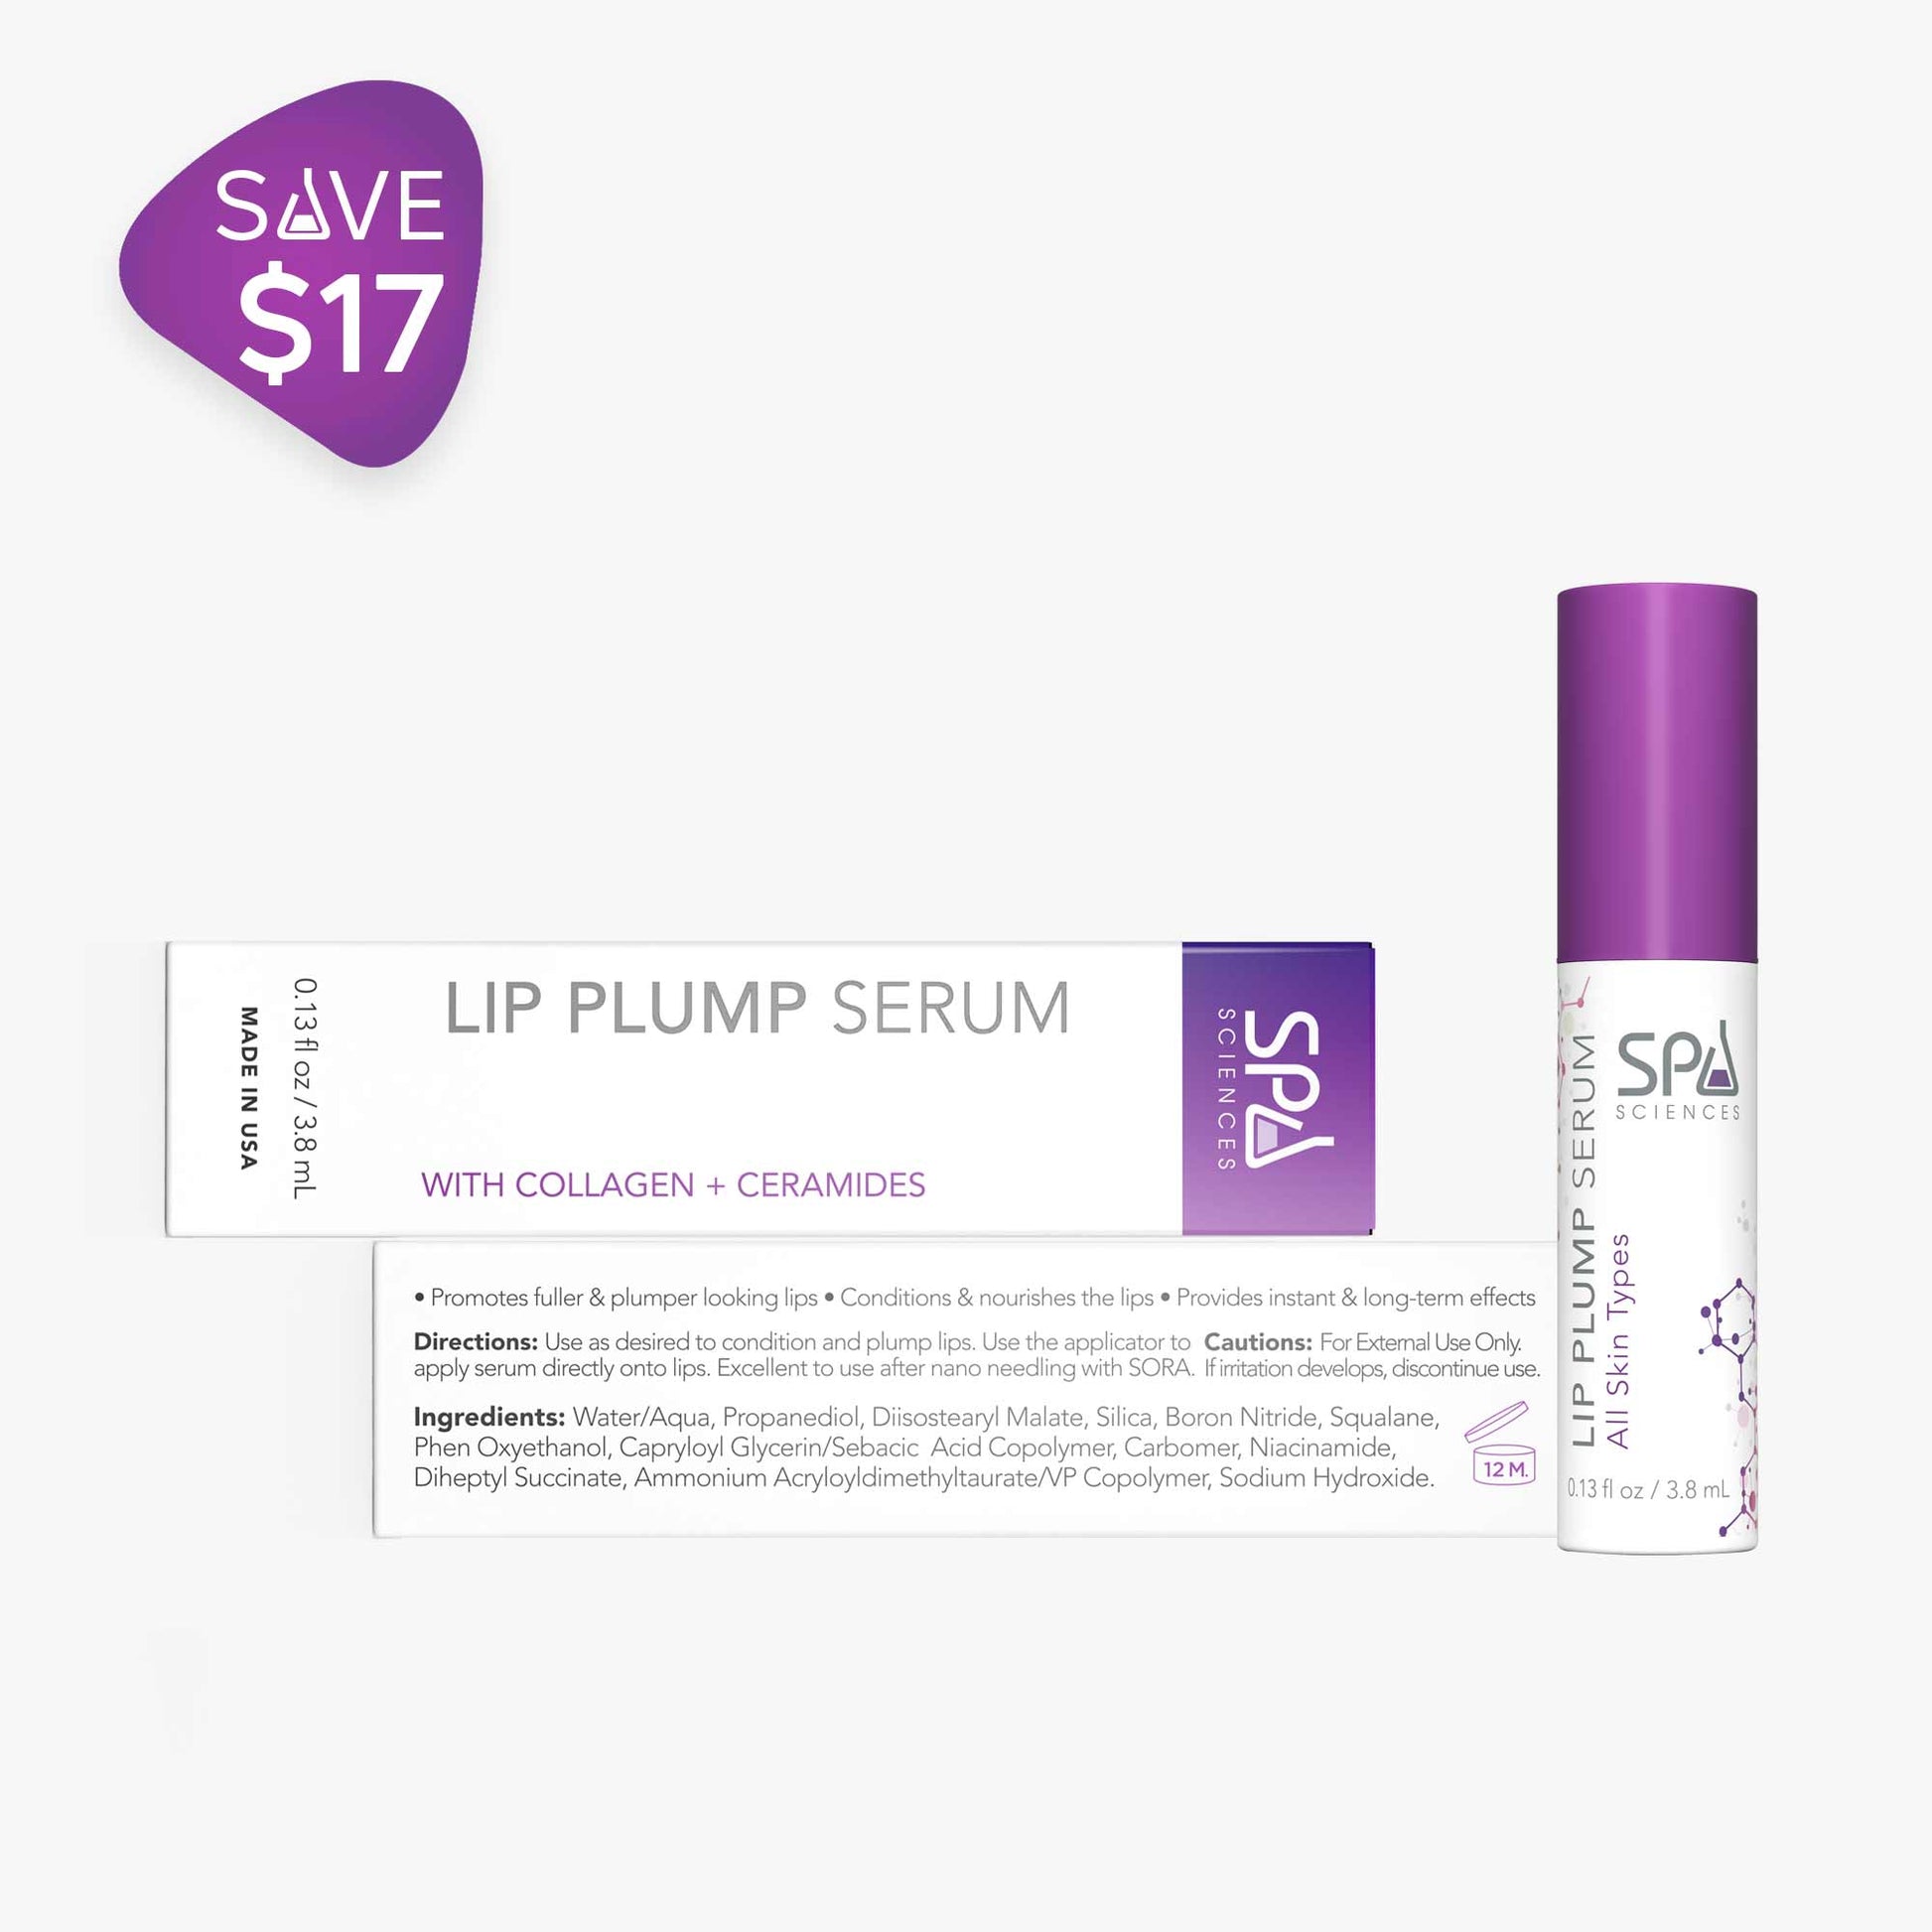 Makeup Guru lip plump serum with a bottle and a price tag by Spa Sciences.